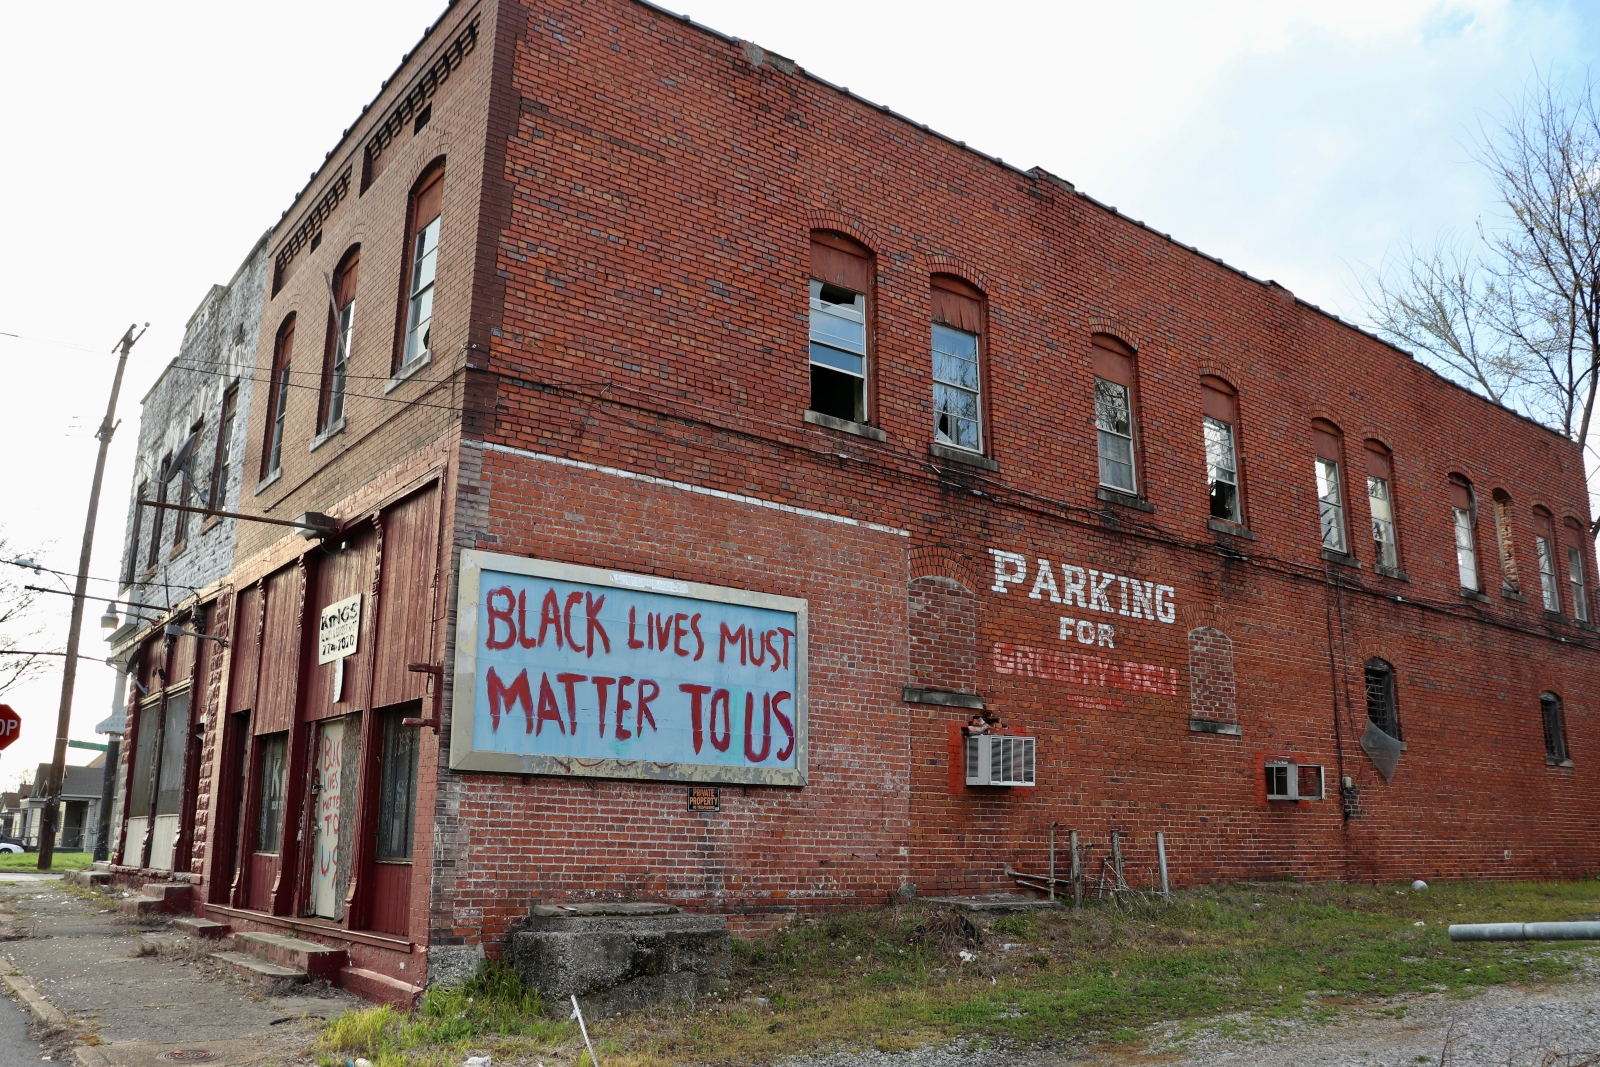 A red brick building has a spray-painted sign that says Black Lives Must Matter to Us